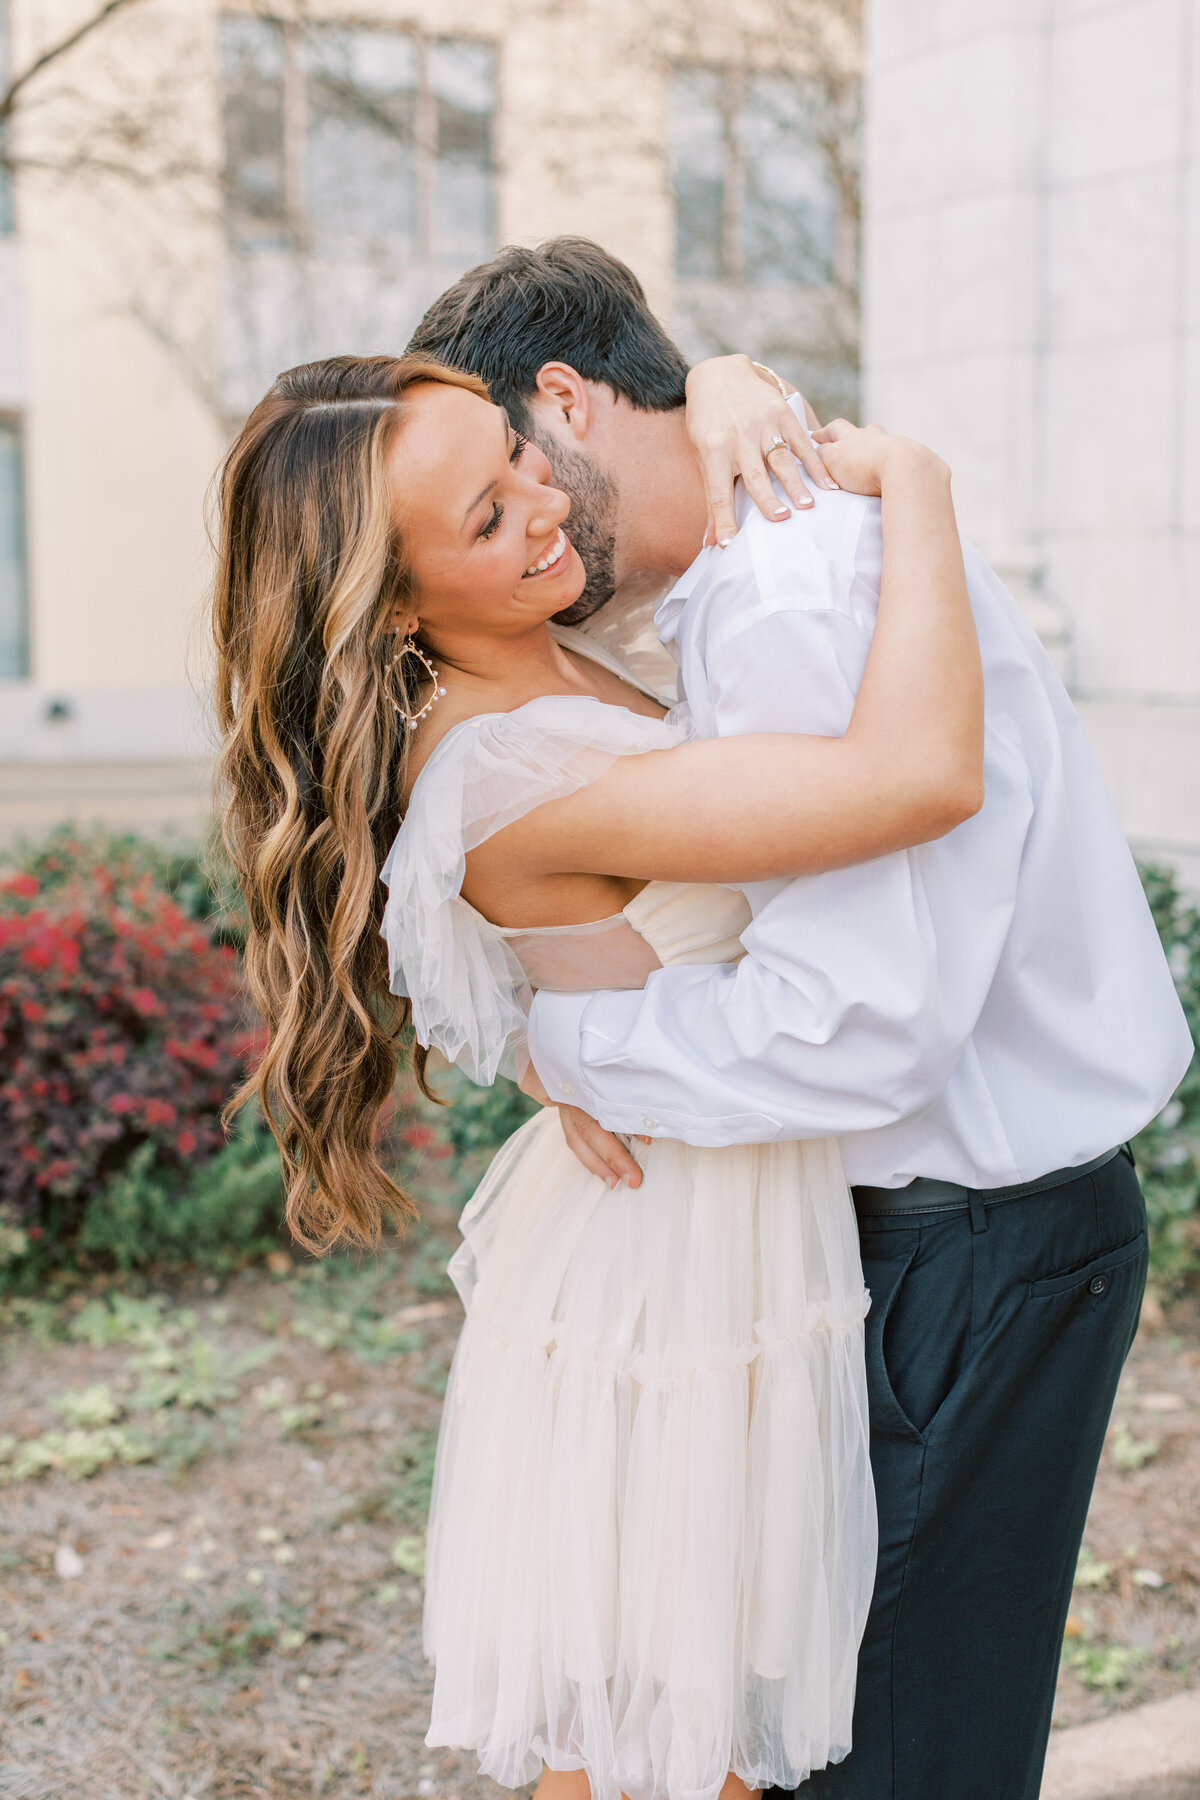 A couple shares an intimate moment for their spring engagement photos.